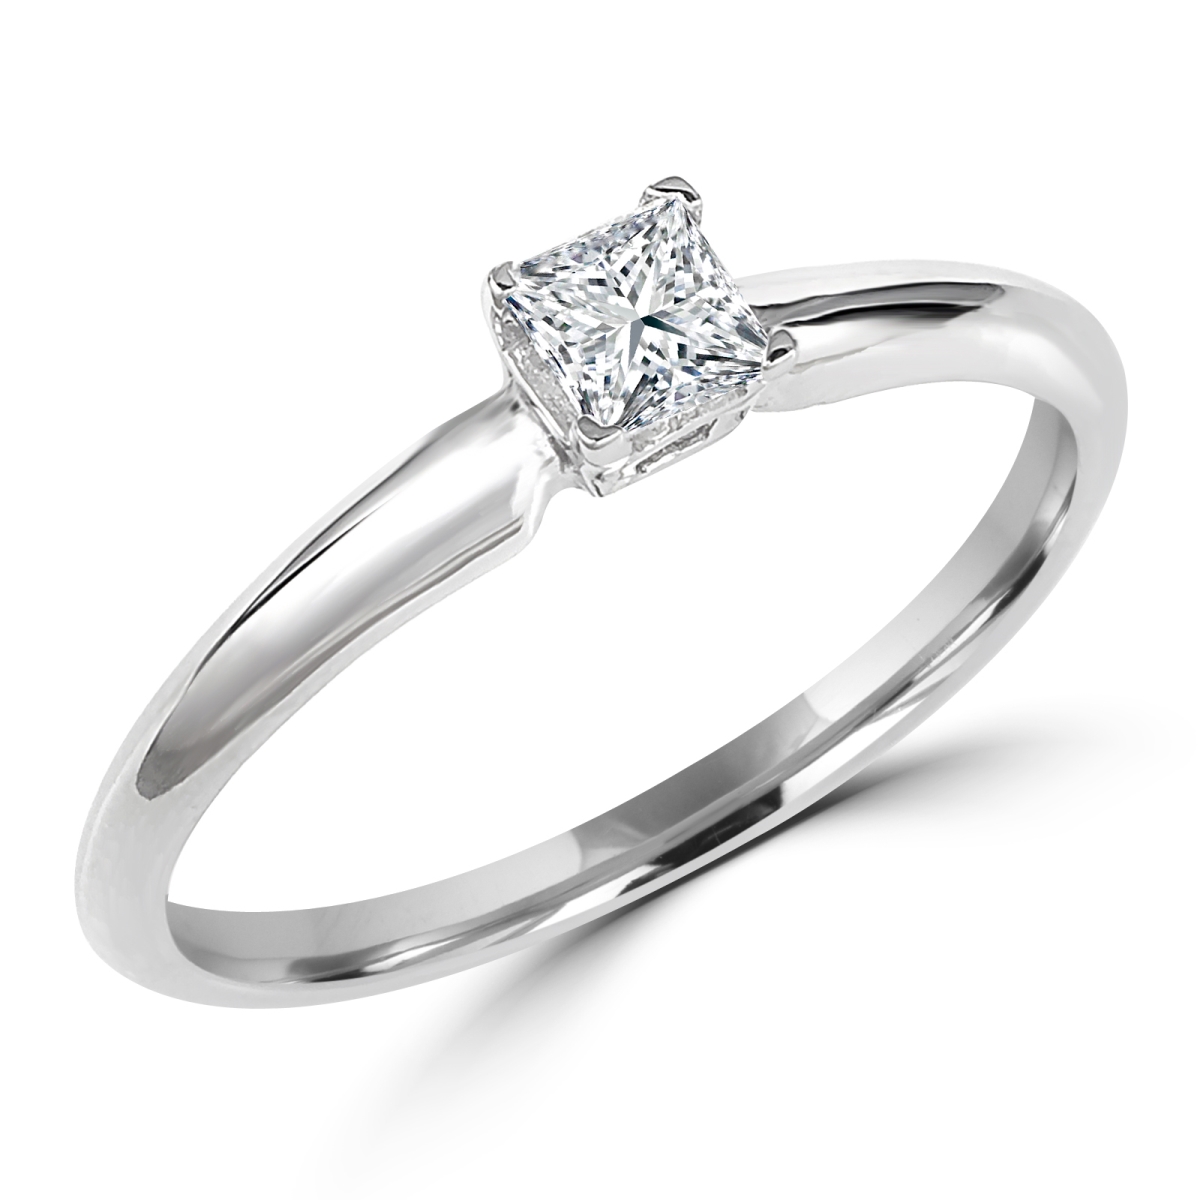 Picture of Majesty Diamonds MD170184-8 0.5 CT Princess Diamond Solitaire Engagement Ring in 10K White Gold - 8